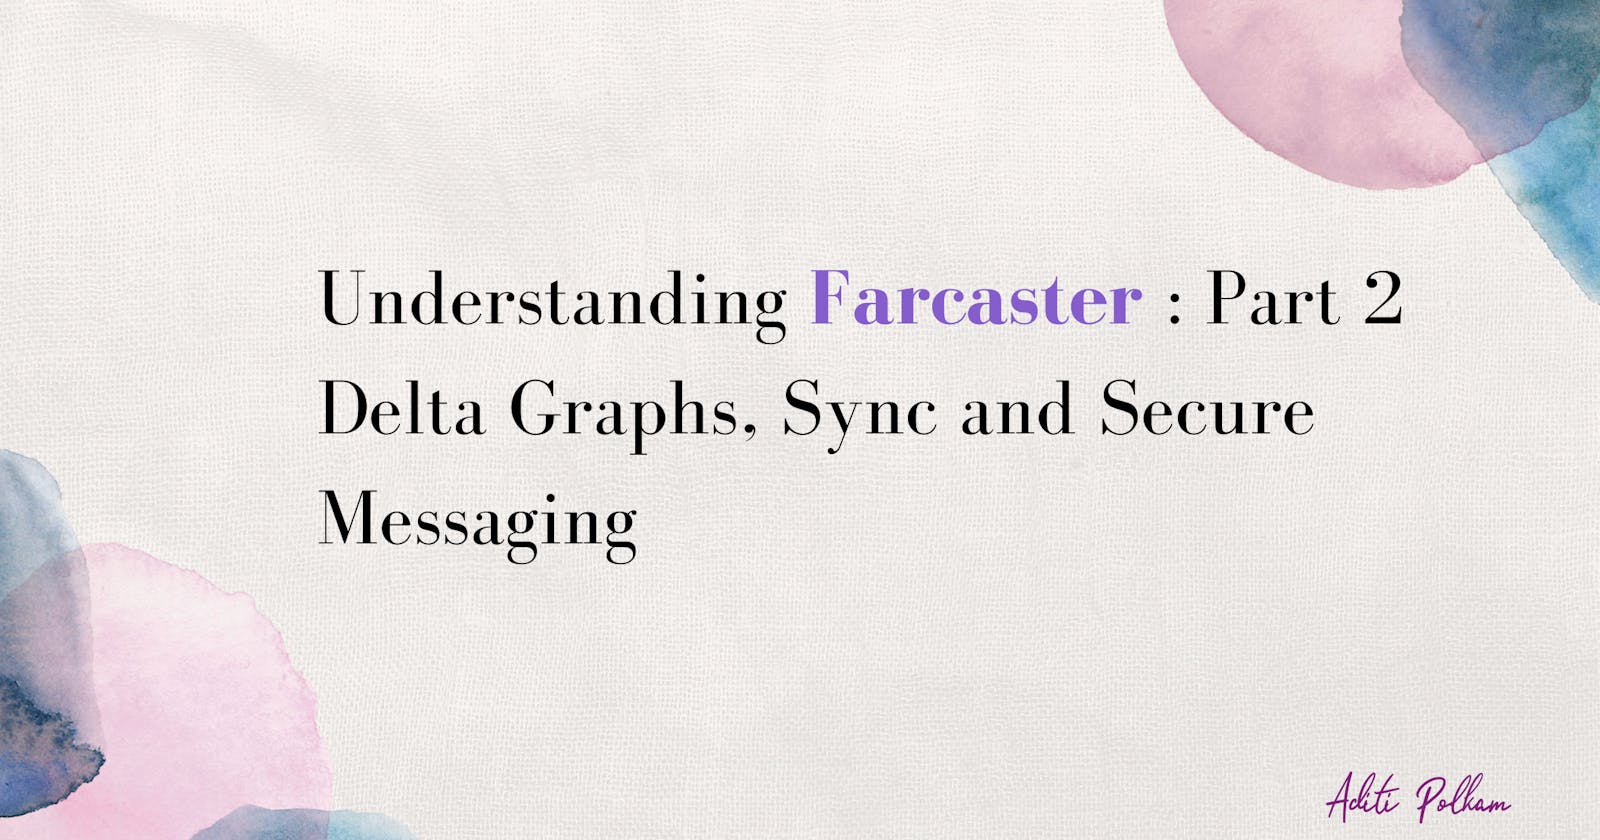 Understanding Farcaster: Part 2;
Delta Graphs, Sync and Secure Messaging